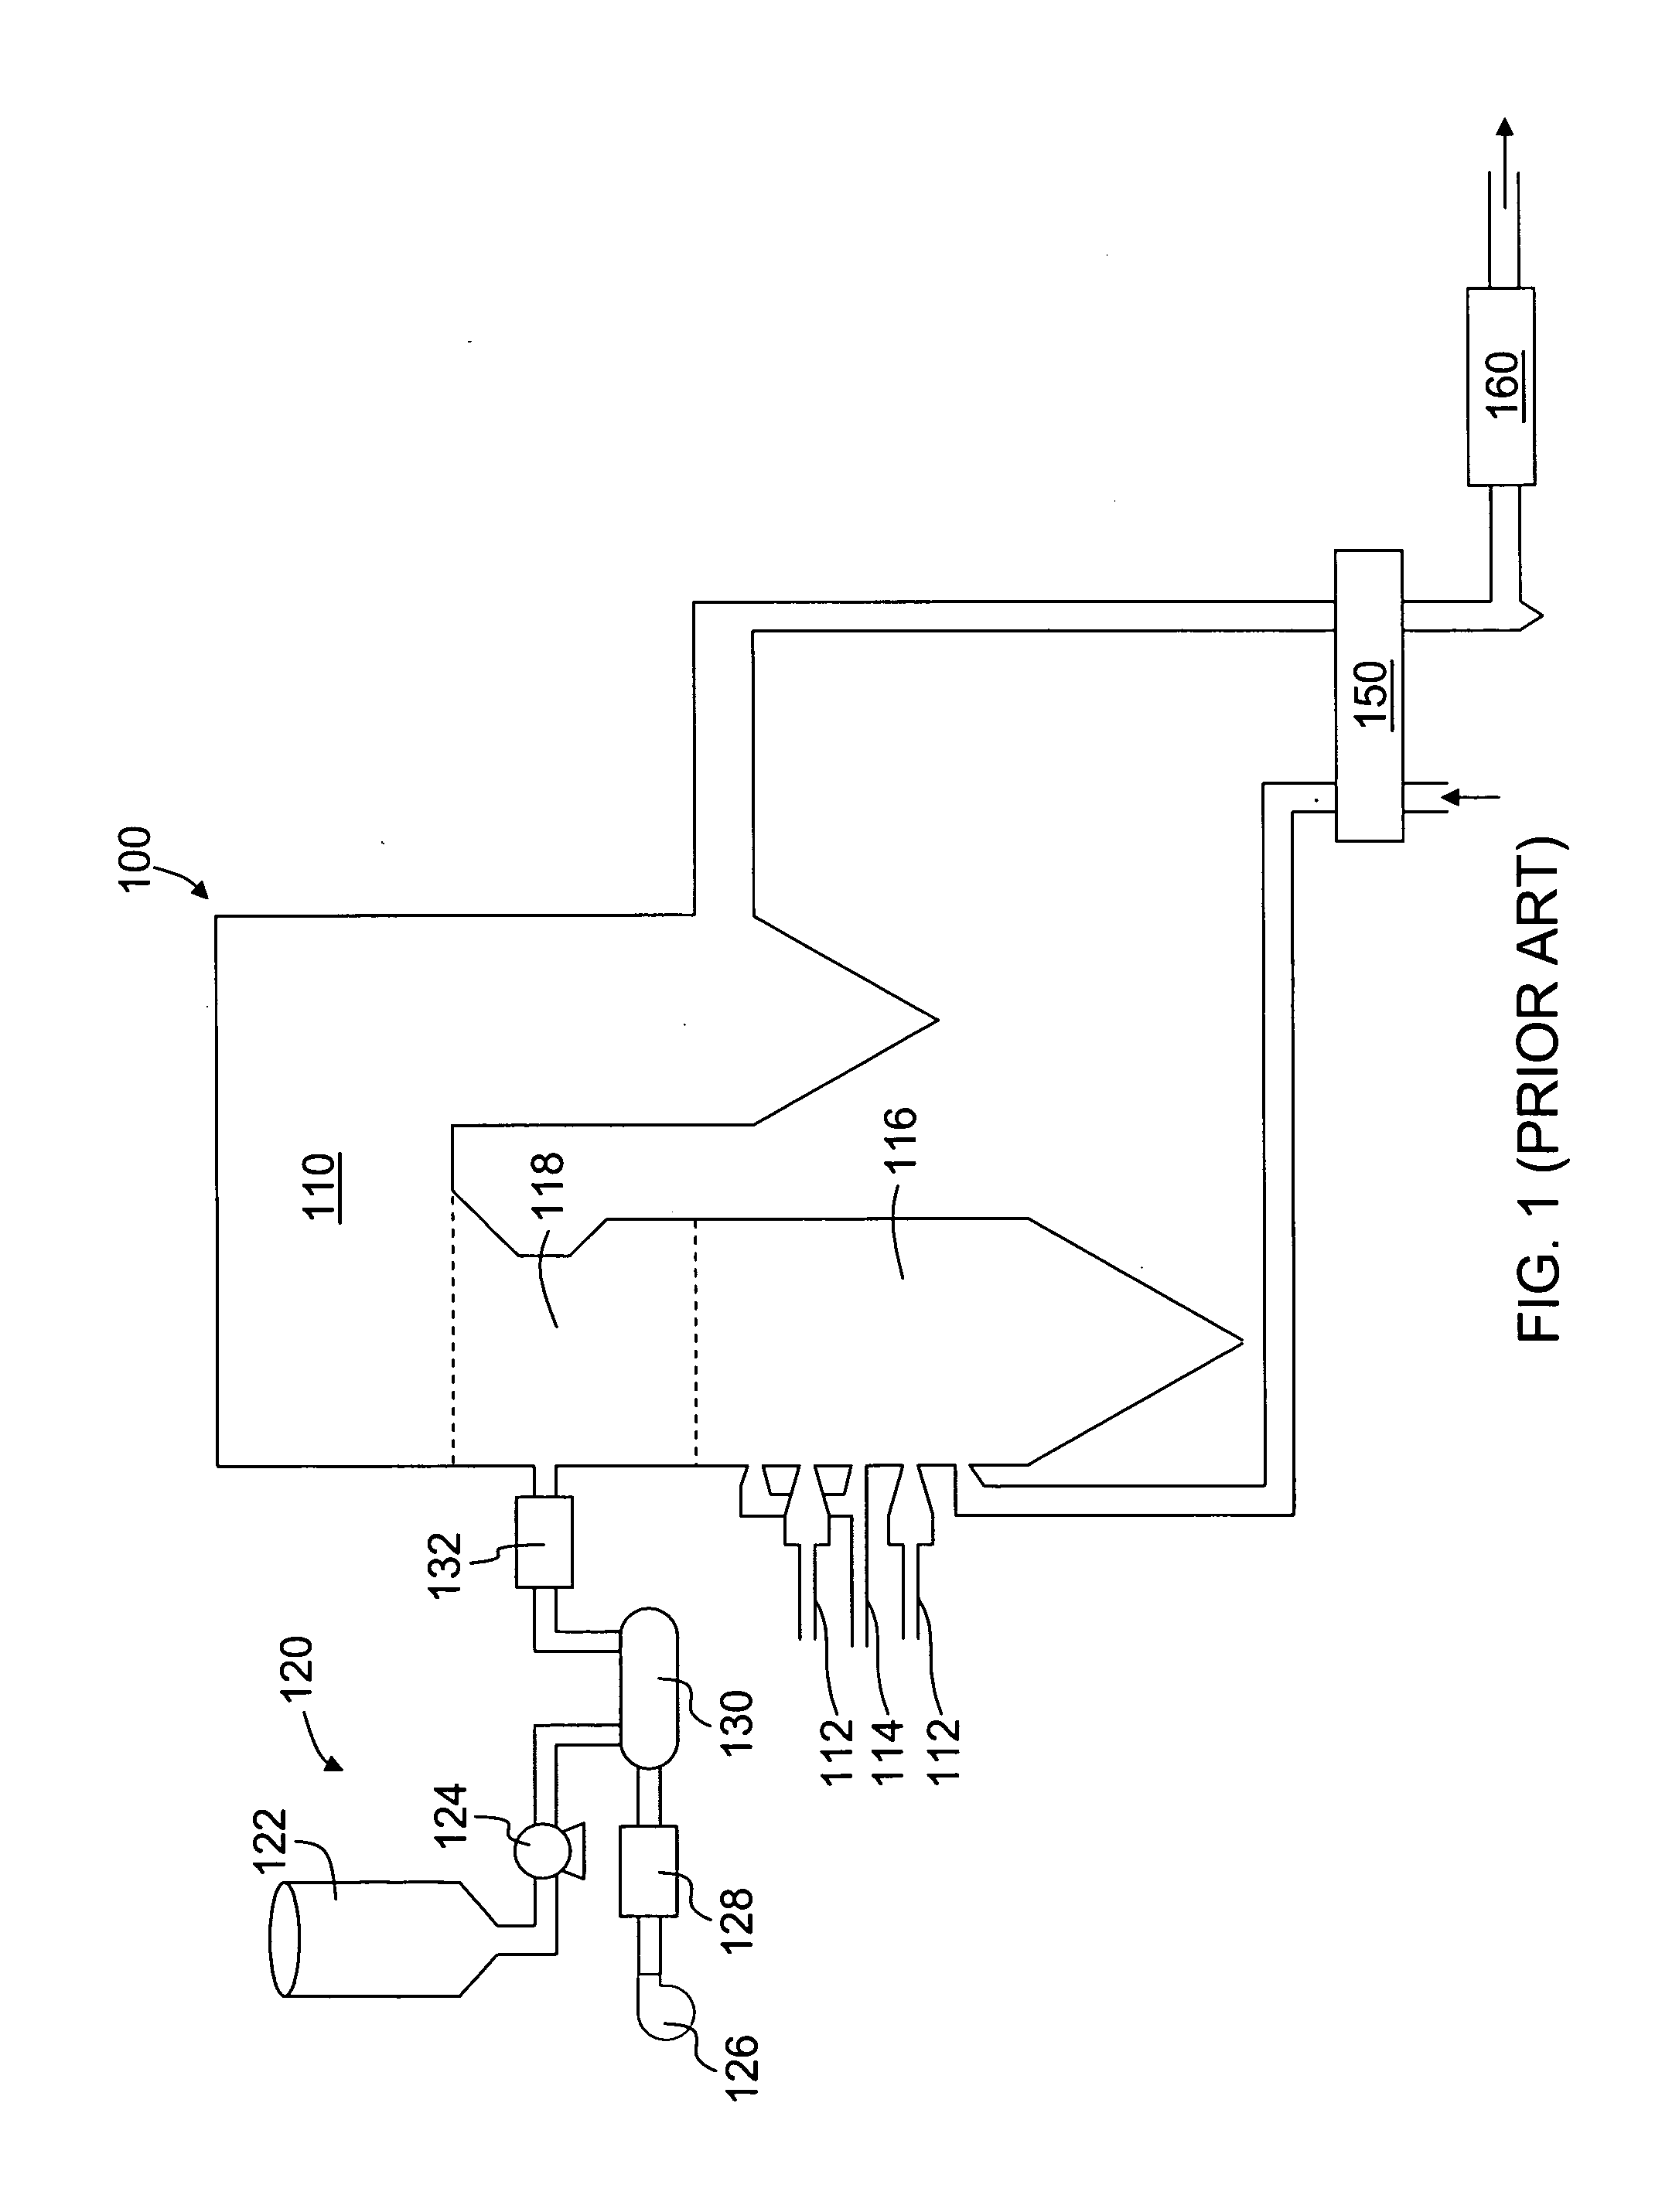 Methods and systems for reducing NOx emissions in industrial combustion systems